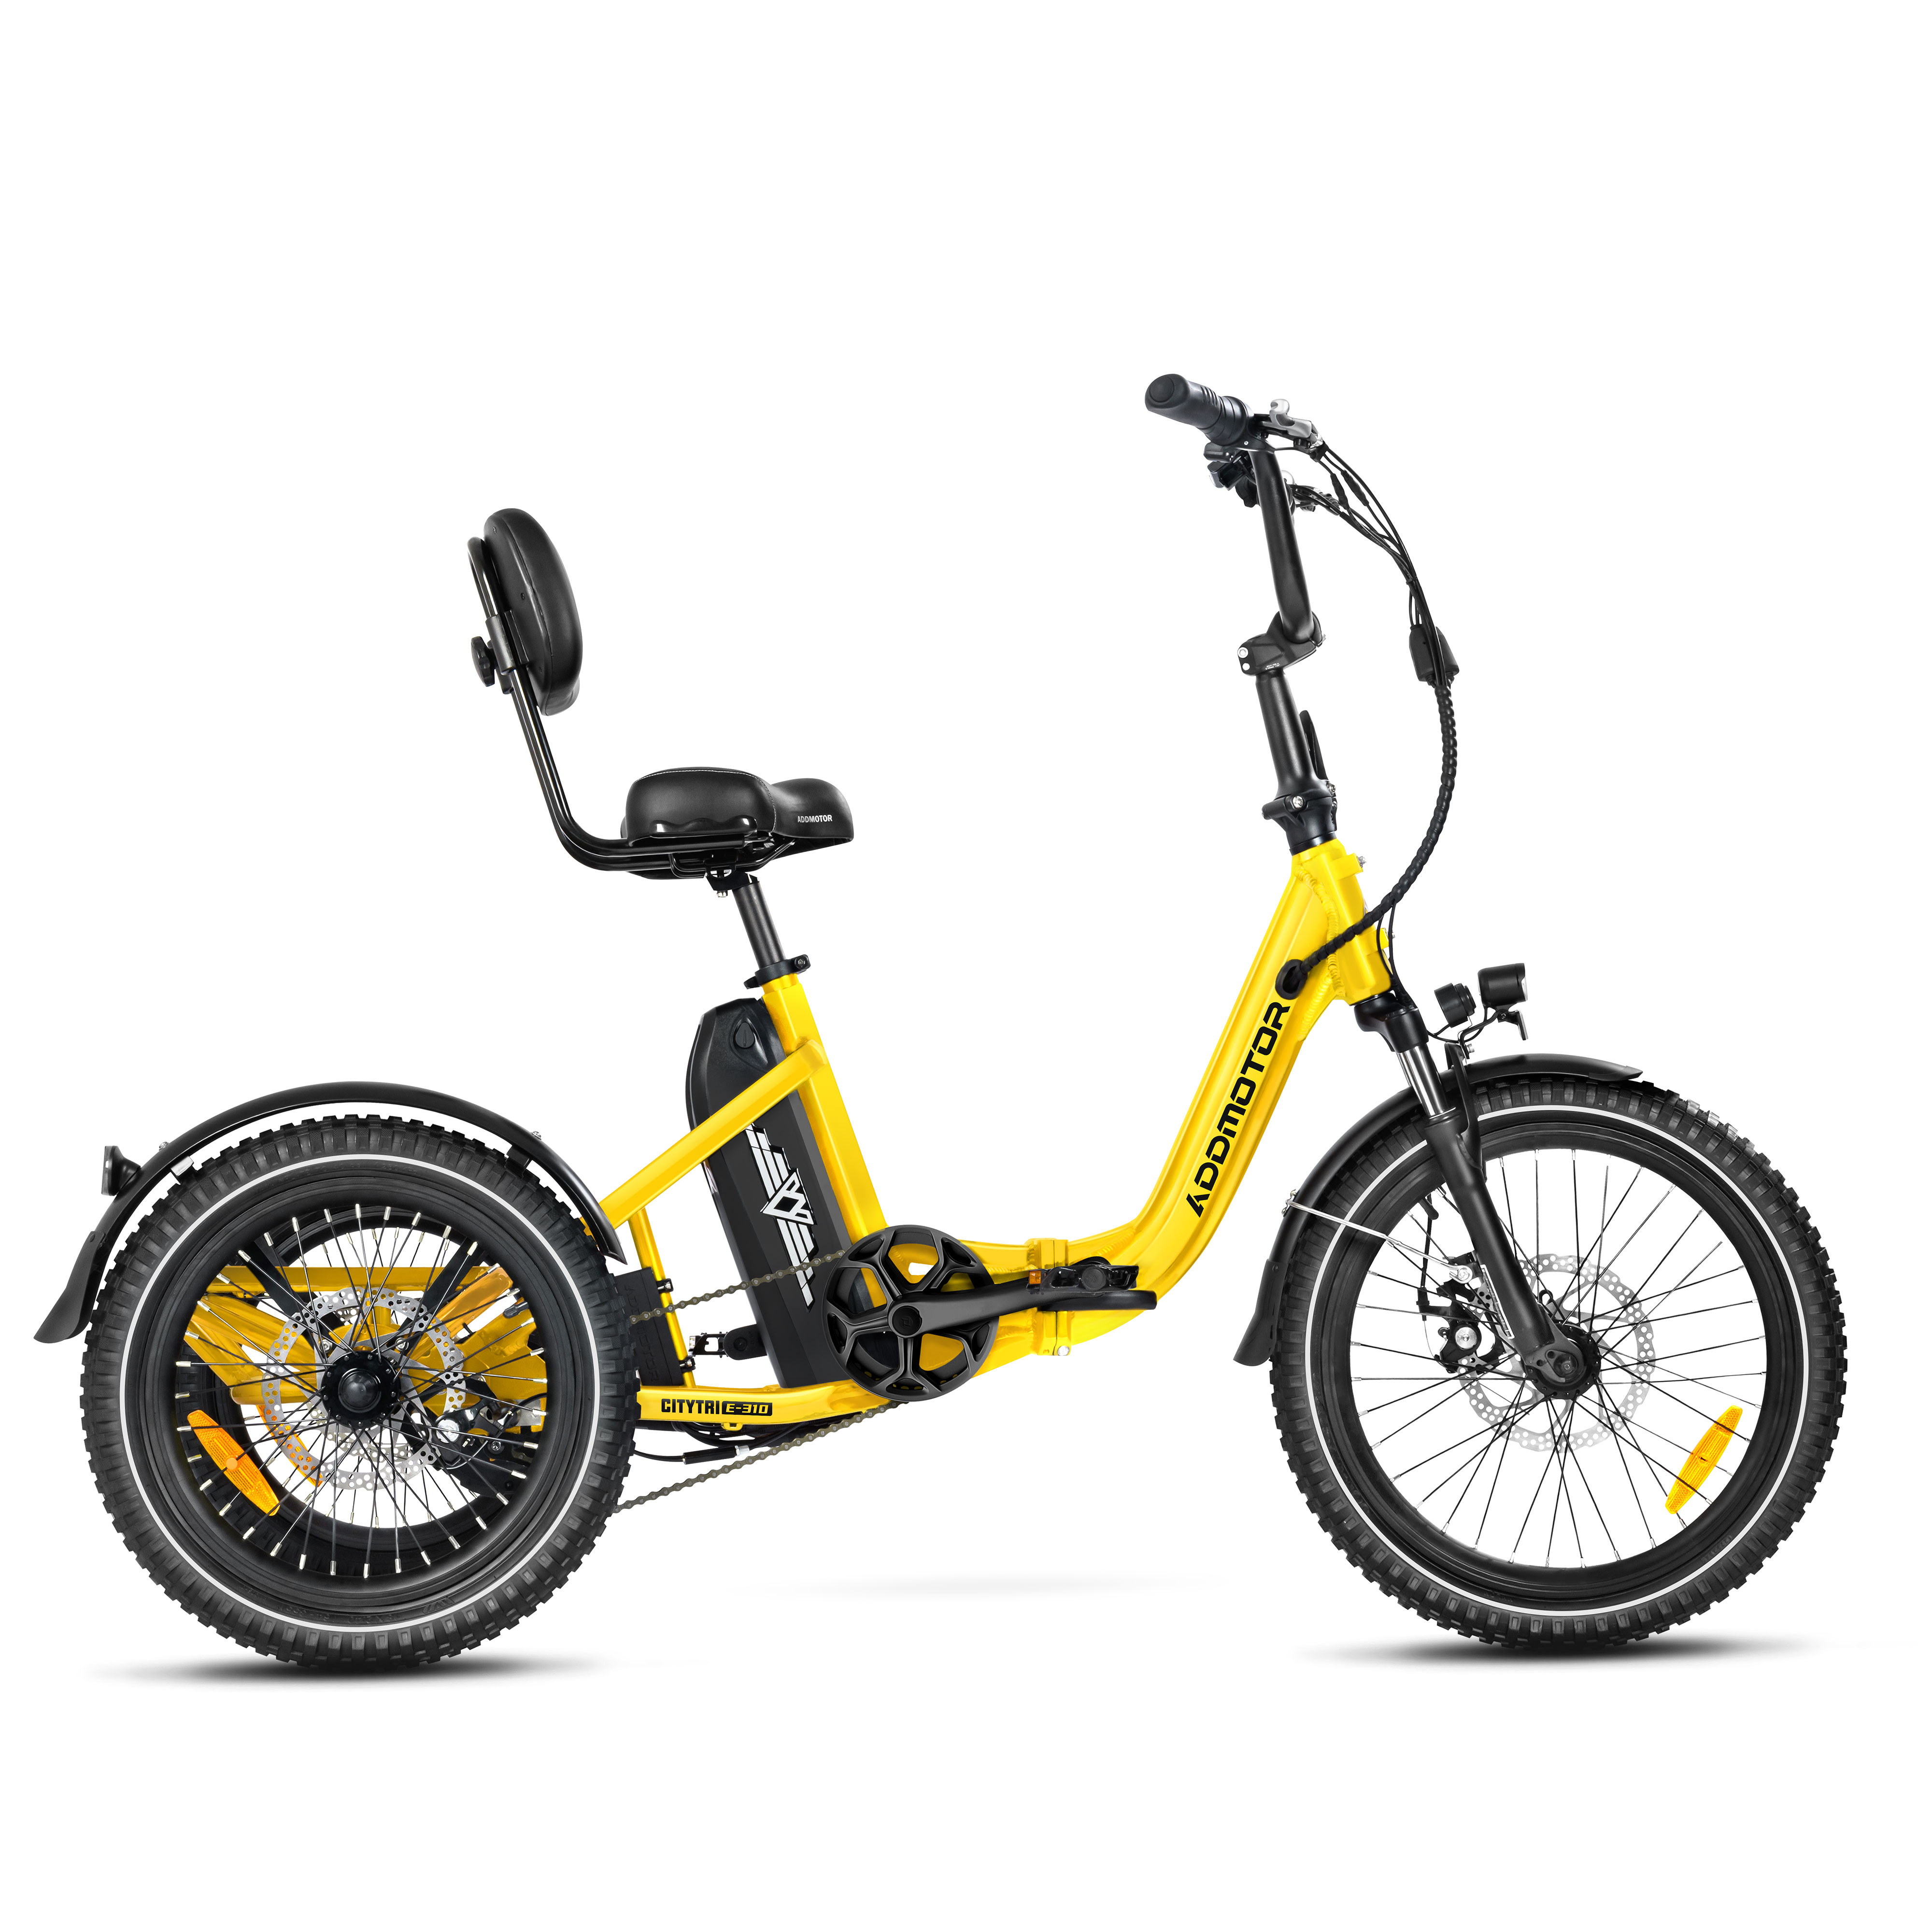 Addmotor Citytri E-310 750W Electric Trike for Adults Best Electric Tricycle Under $2000 Up To 93 Miles - Candy Red